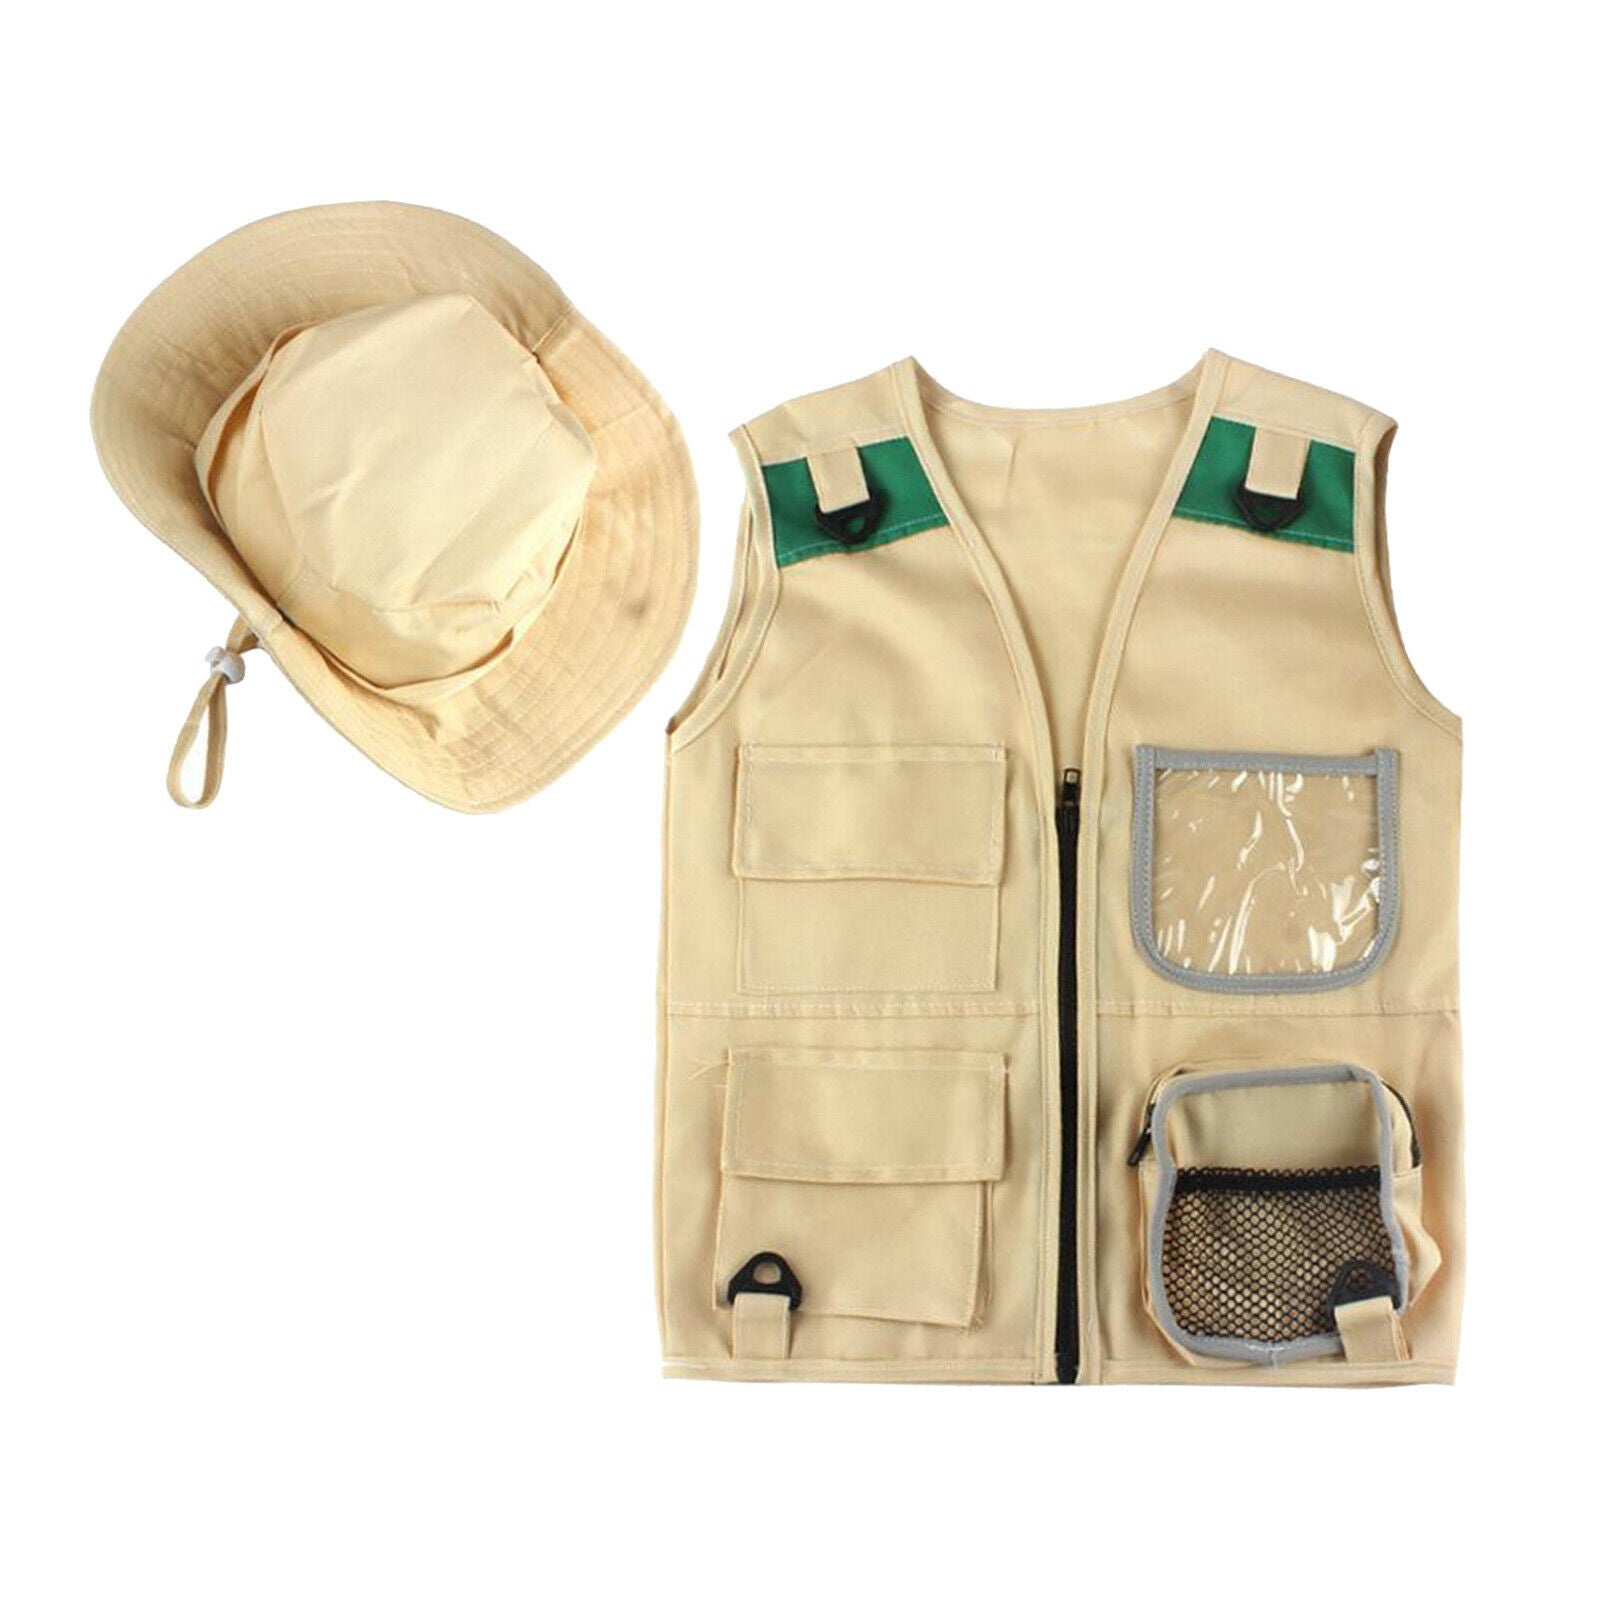 Young Kid's Khaki Cargo Vest and Hat Backyard Dress Up Playing Clothes for